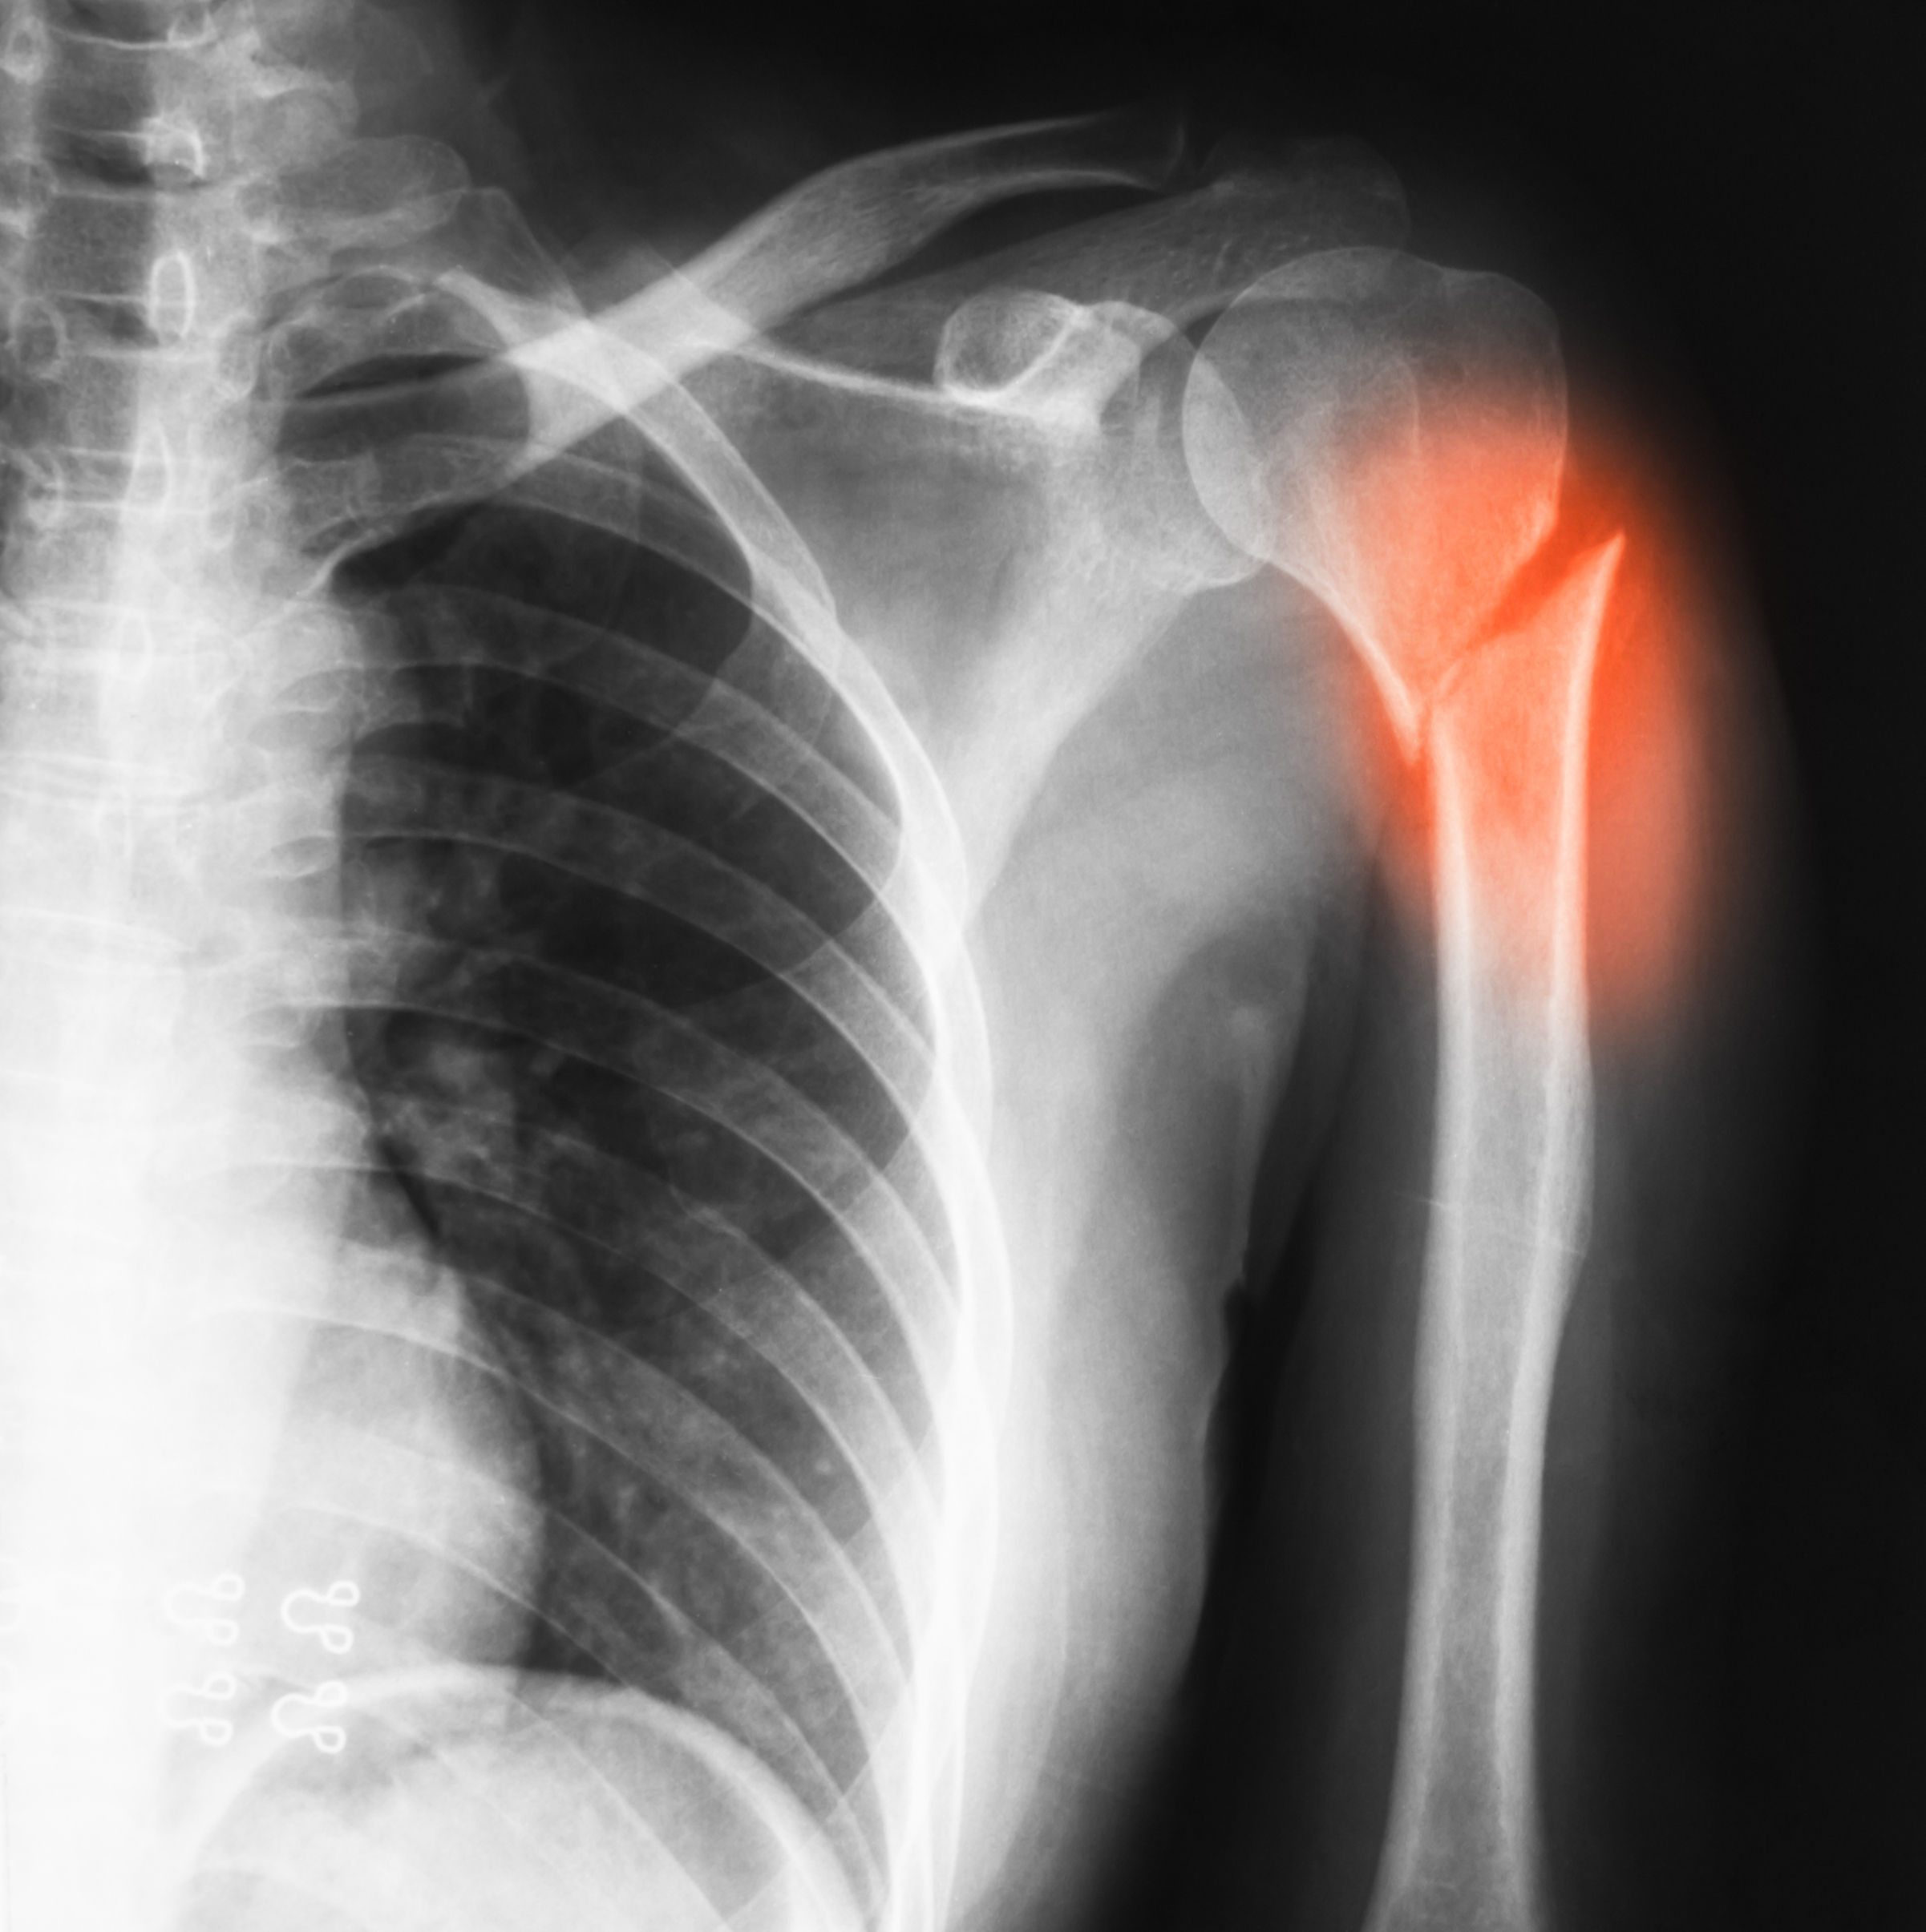 X-ray image showing a fracture in the arm bone near the shoulder joint.